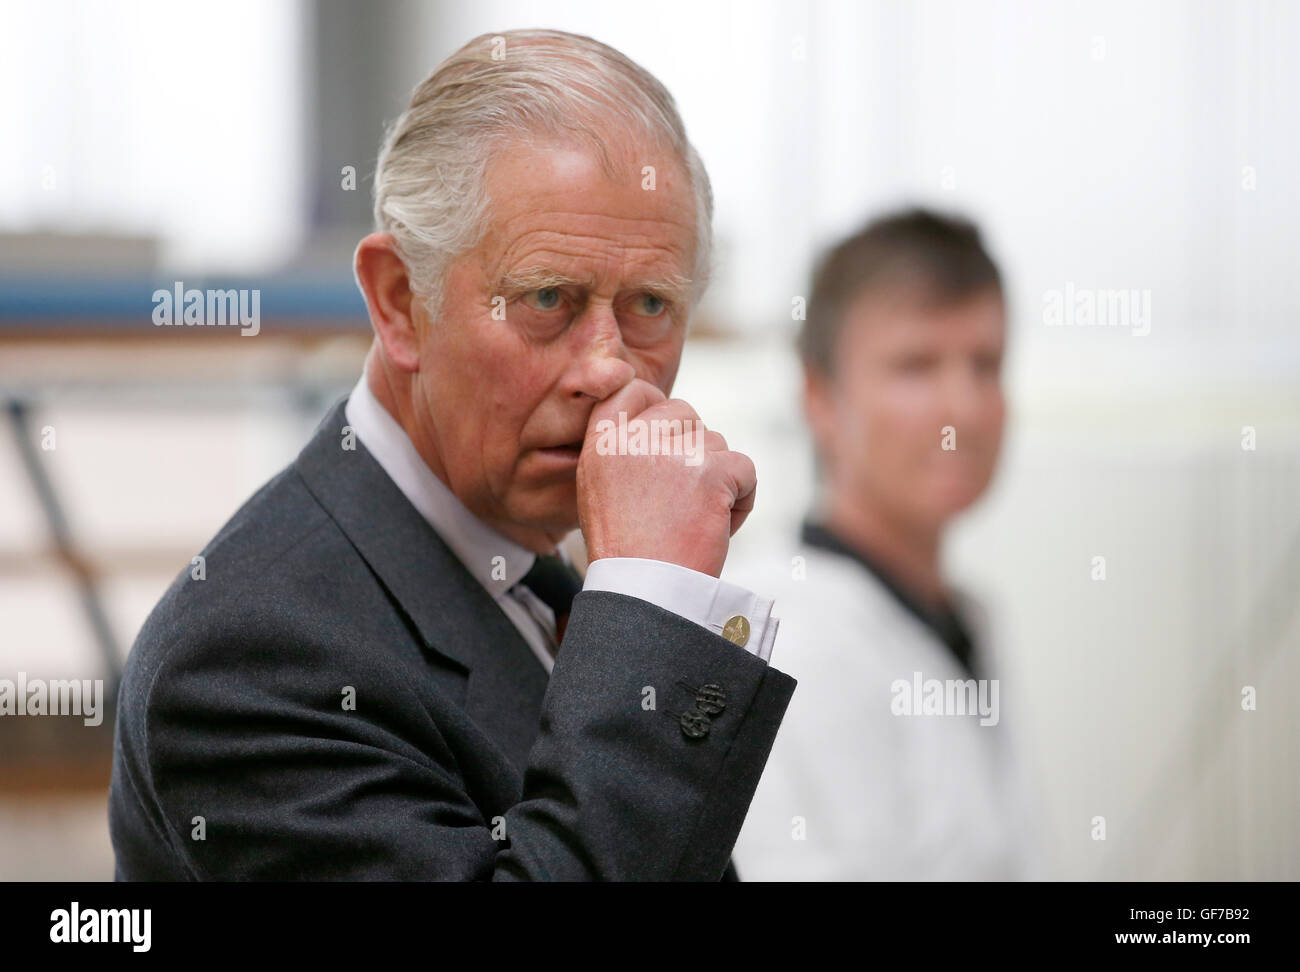 The Prince of Wales, also known as the Duke of Rothesay, visits Anta home furnishings in Fearn, Scotland, to see how the business supports traditional craft skills. Stock Photo